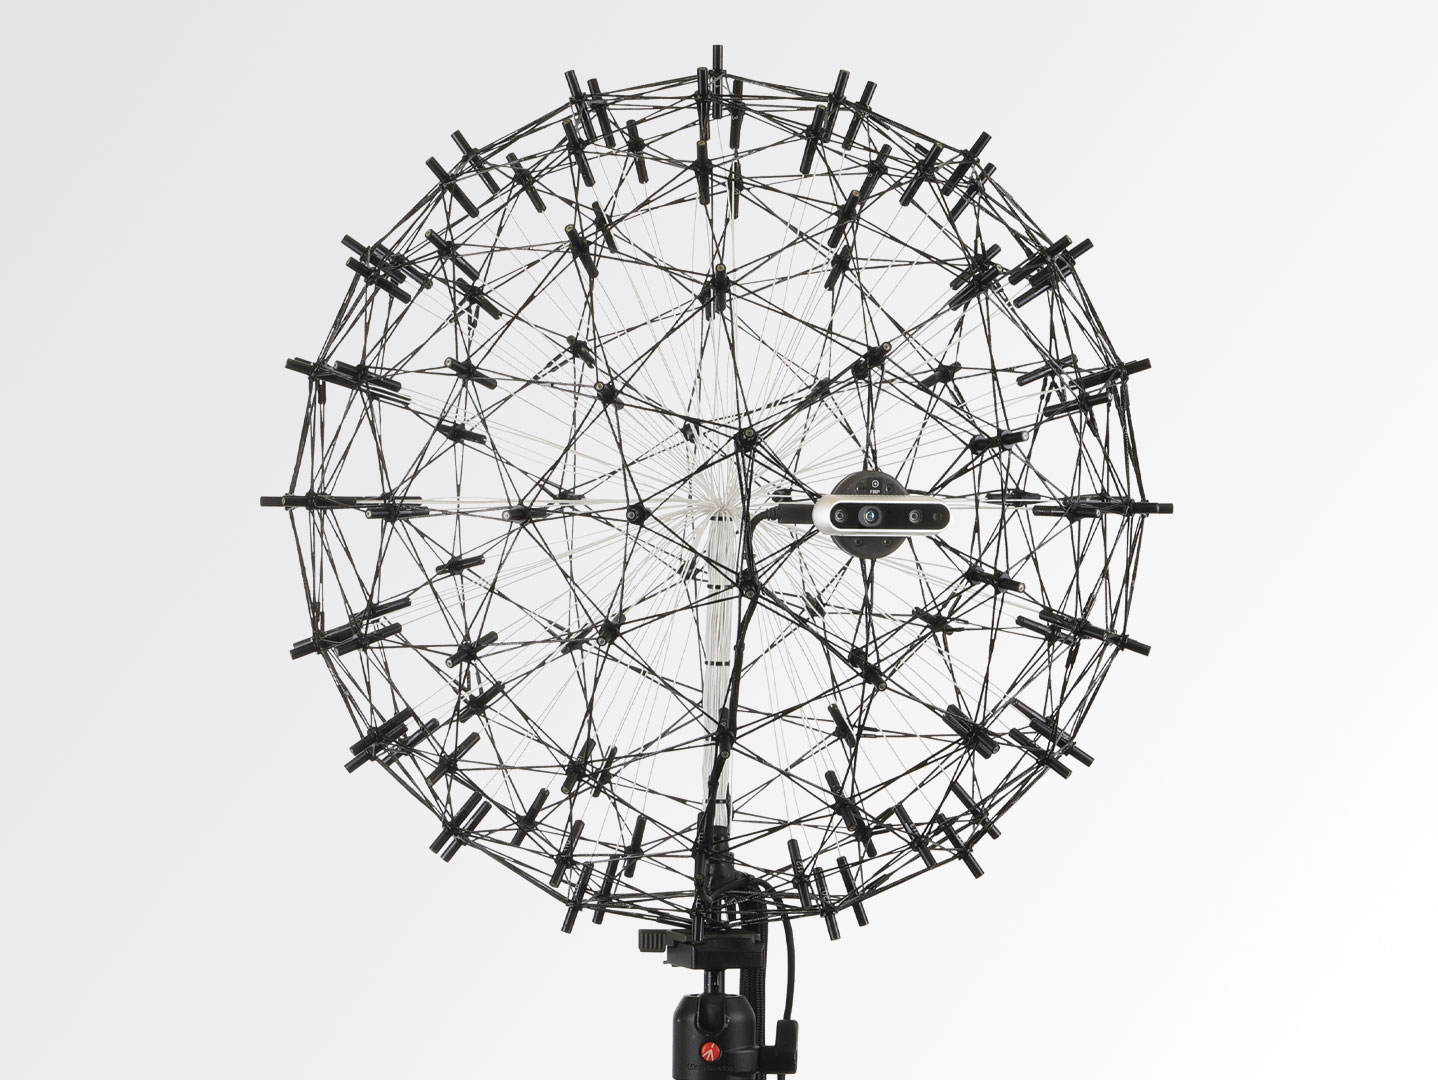 Sphere120 AC Pro microphone array with Intel® RealSense™ depth camera<br>
